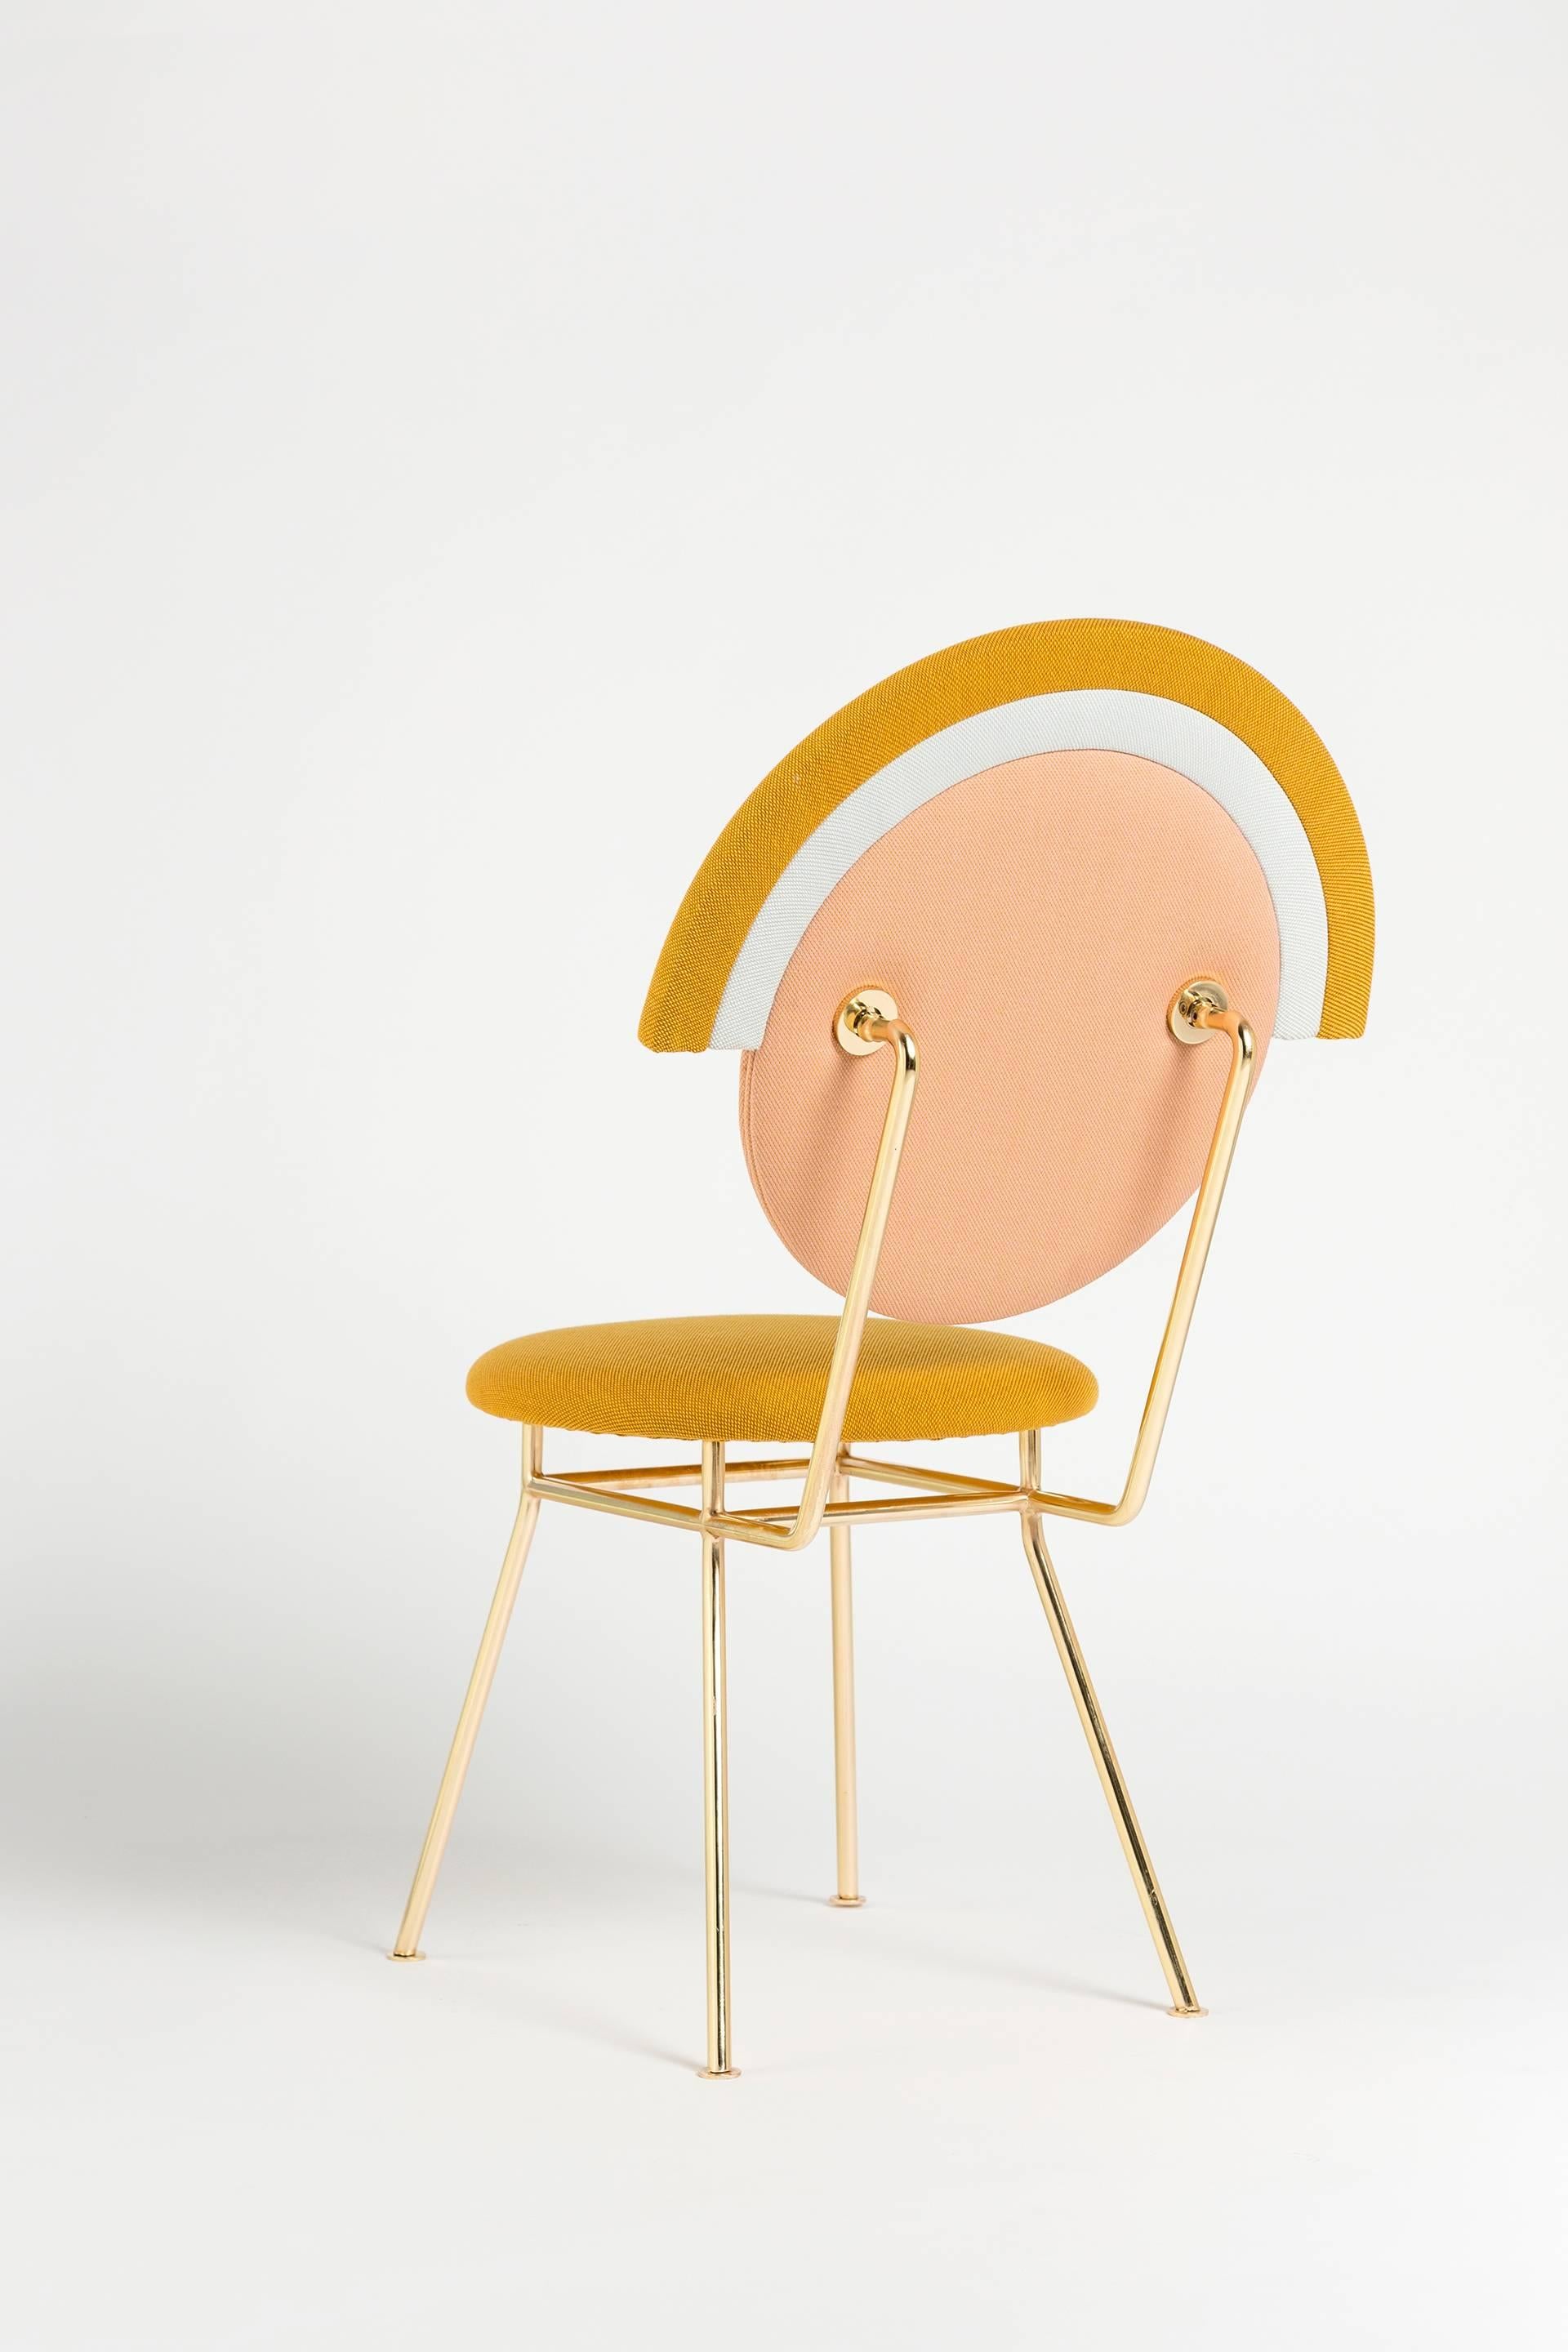 Iris Chair with Brass Finished Legs by Merve Kahraman In New Condition For Sale In Firenze, IT